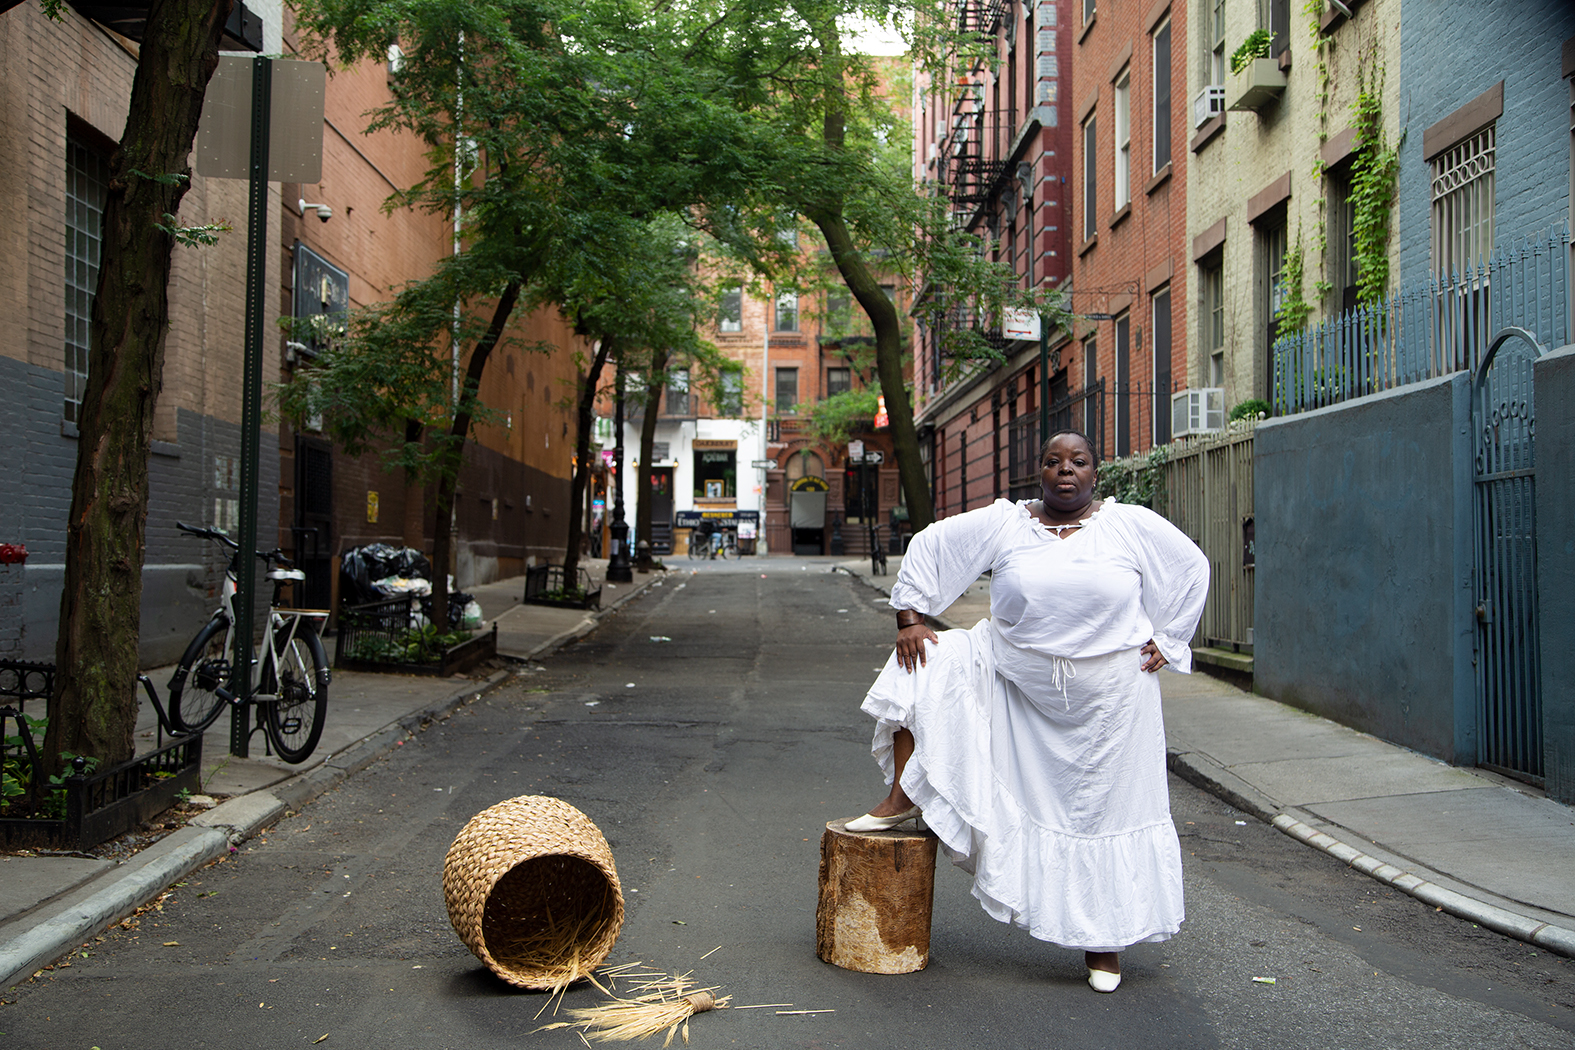 Nona Faustine, ‘Dorothy Angola, Stay Free, In Land Of The Blacks’, Minetta Lane, Village, NYC, 2021, from White Shoes (MACK, 2021). Courtesy the artist and MACK.